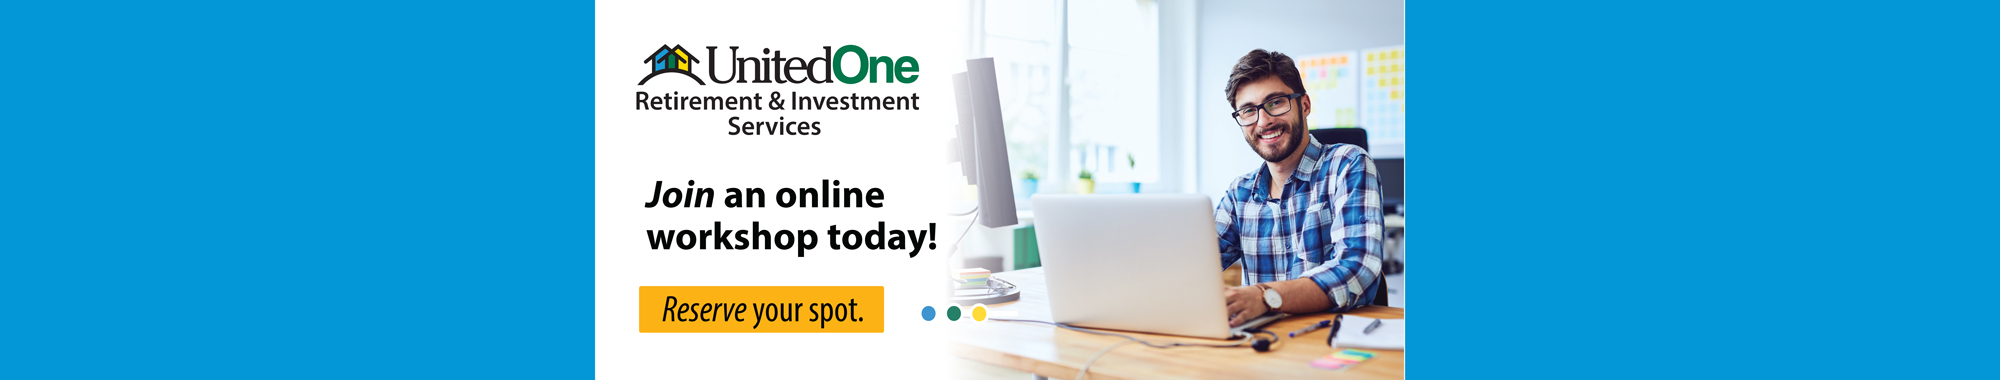 UnitedOne Retirement & Investment Services. Join an online workshop today! Reserve your spot.